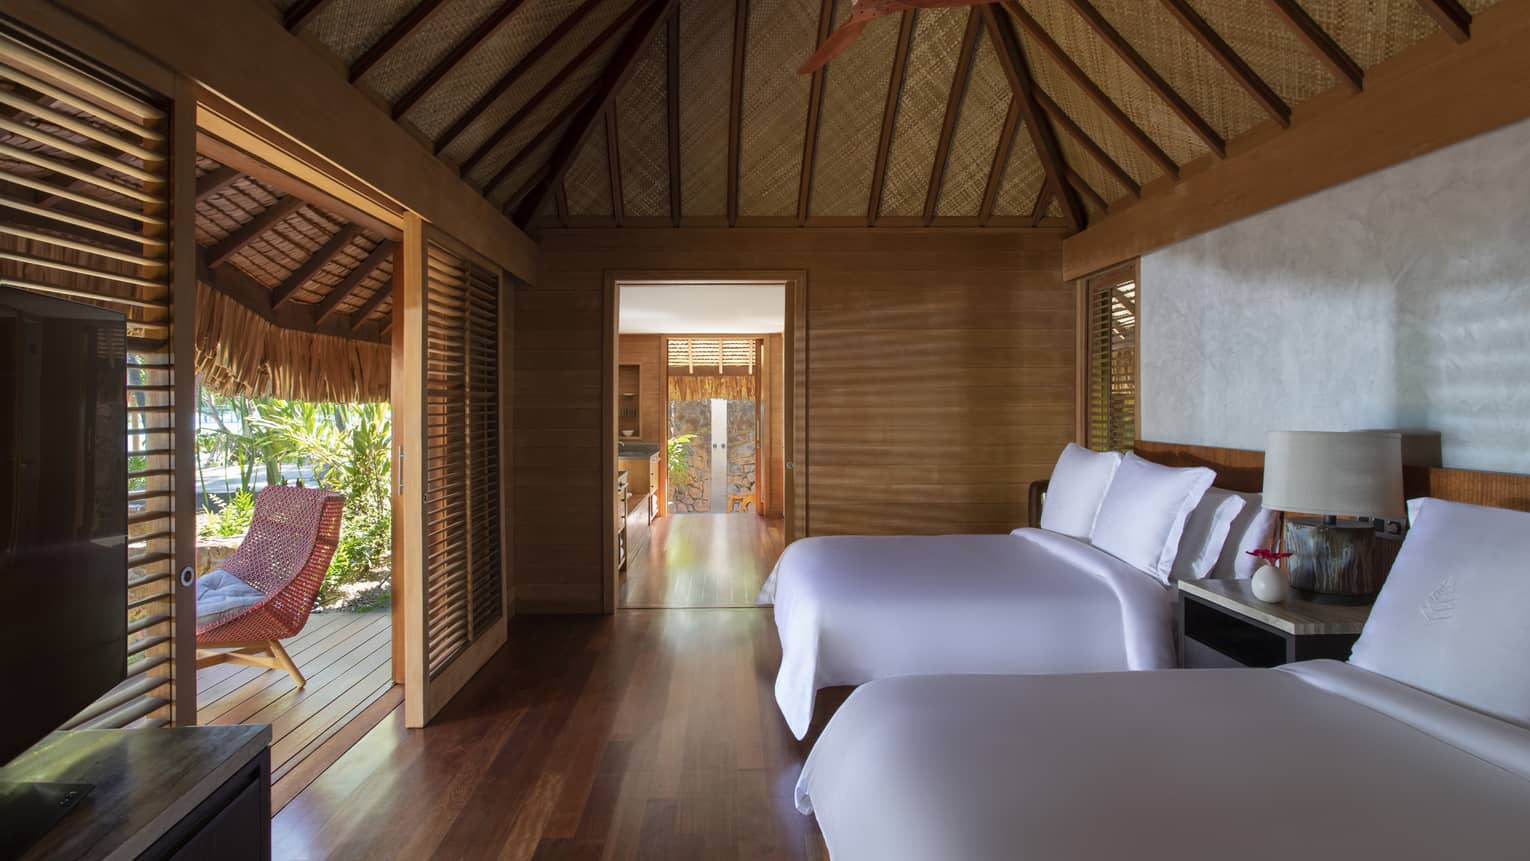 Two queen beds in a villa, with teak floors, a thatched roof and a walk-out patio